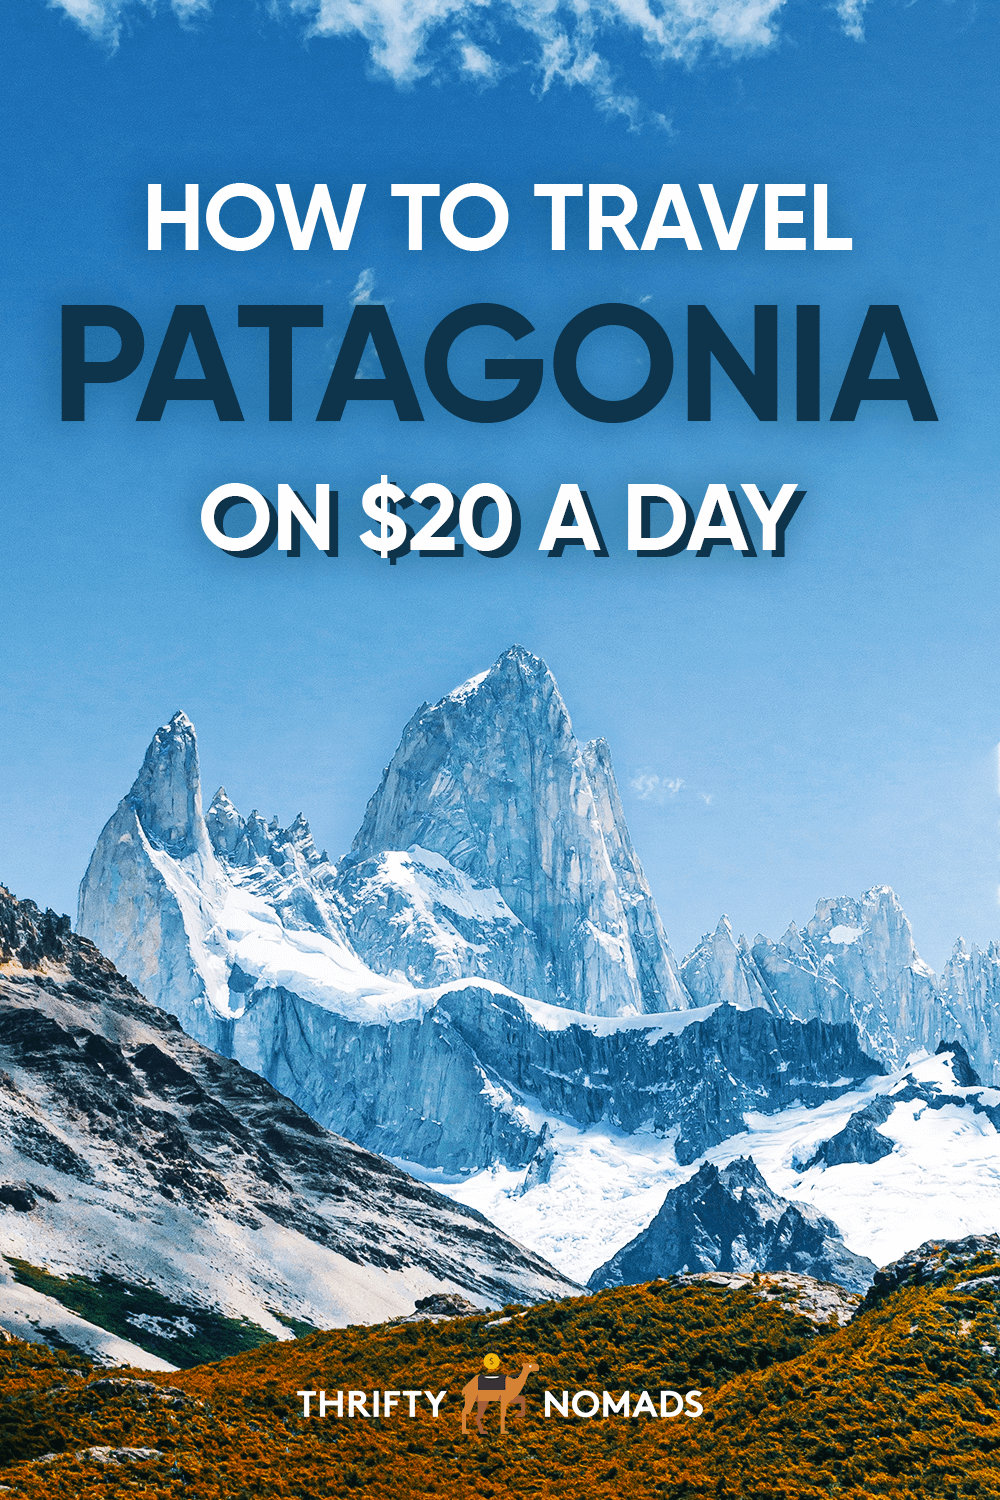 How to Travel Patagonia on $20 a Day - Thrifty Nomads